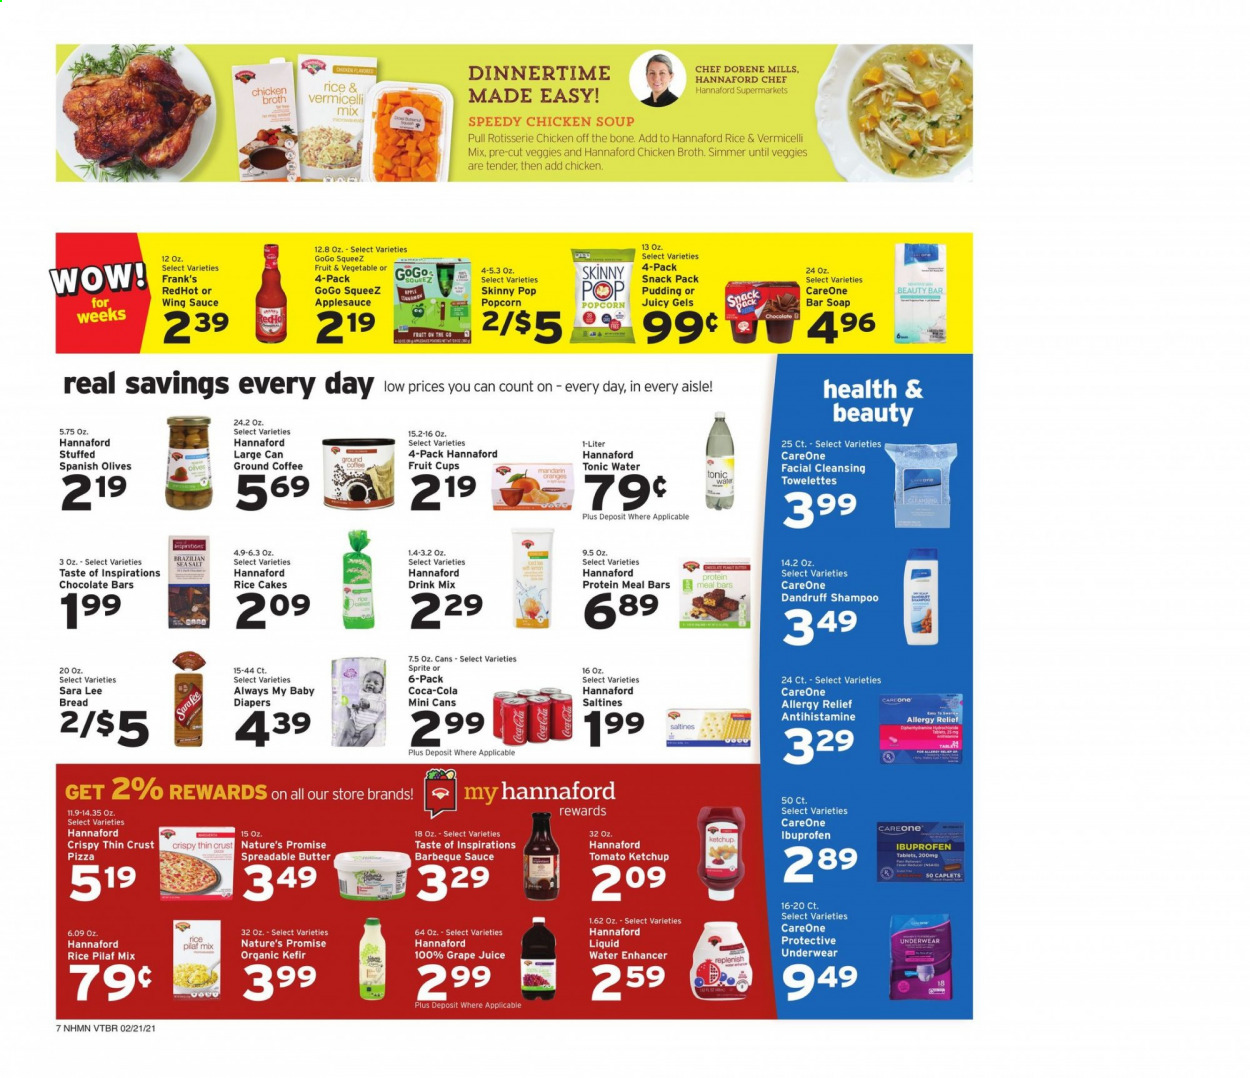 thumbnail - Hannaford Flyer - 02/21/2021 - 02/27/2021 - Sales products - fruit cup, bread, Nature’s Promise, Sara Lee, cake, oranges, pizza, chicken soup, soup, sauce, pudding, kefir, butter, spreadable butter, chocolate, popcorn, saltines, Skinny Pop, chicken broth, sea salt, broth, mandarines, olives, BBQ sauce, ketchup, wing sauce, apple sauce, Sprite, juice, tonic, ground coffee, shampoo, soap bar, soap, pan, Ibuprofen, allergy relief. Page 7.